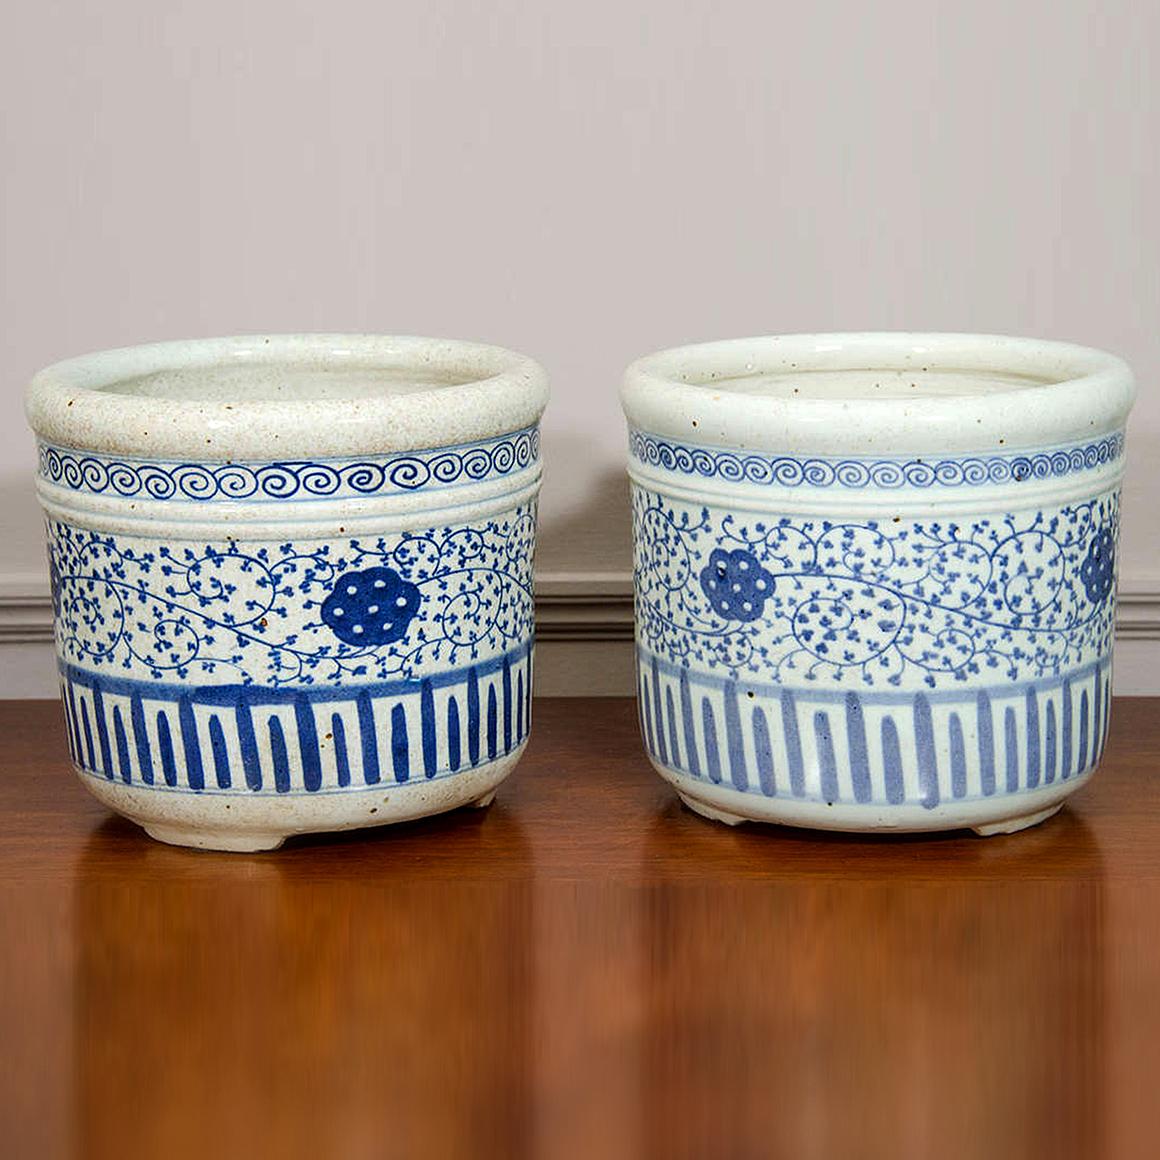 Pair of Chinese Blue and White Porcelain Planters. Ornamented in cobalt with floral and geometric motifs.